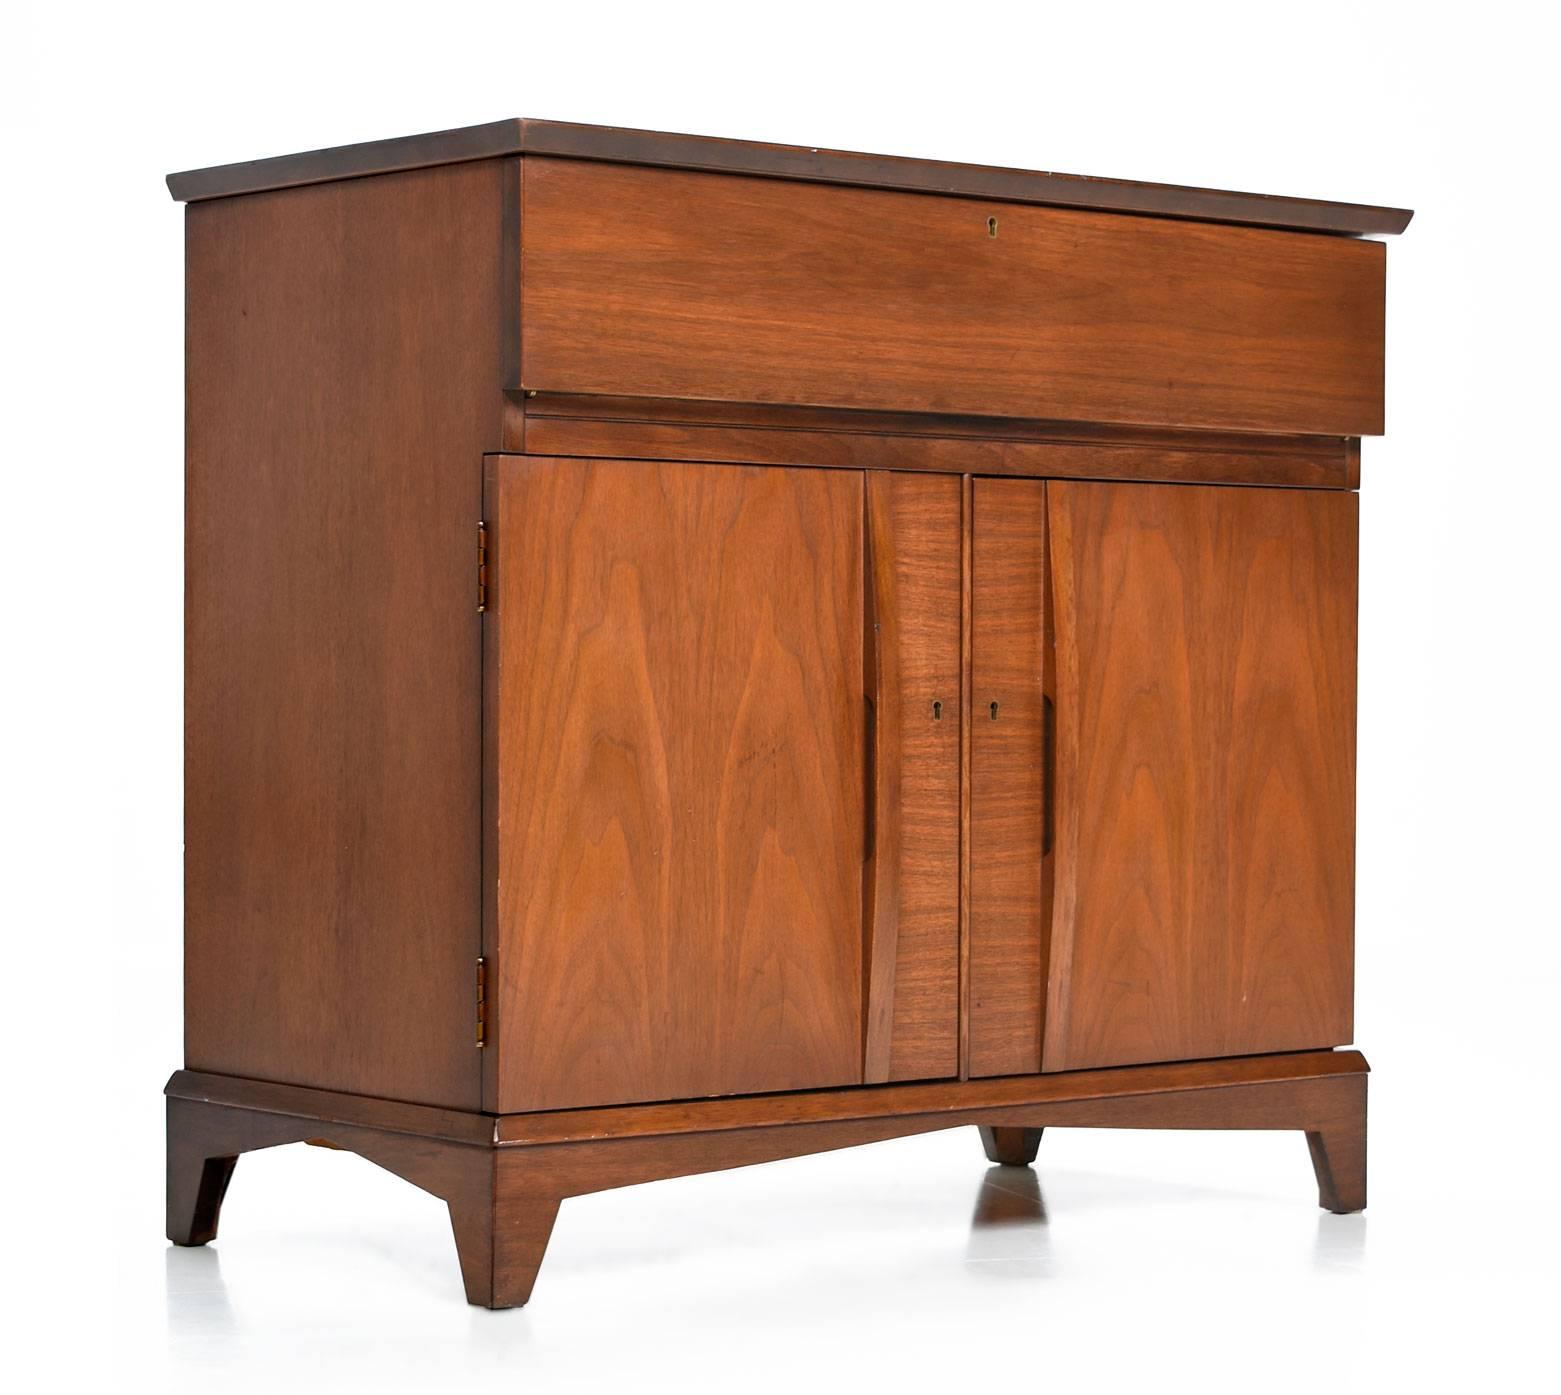 Midcentury American made walnut bar cabinet. This unassuming piece looks like a typical server when closed. Lift the top to reveal a Formica top surface for preparing drinks, and several divided spaces for storing glassware. The lower portion